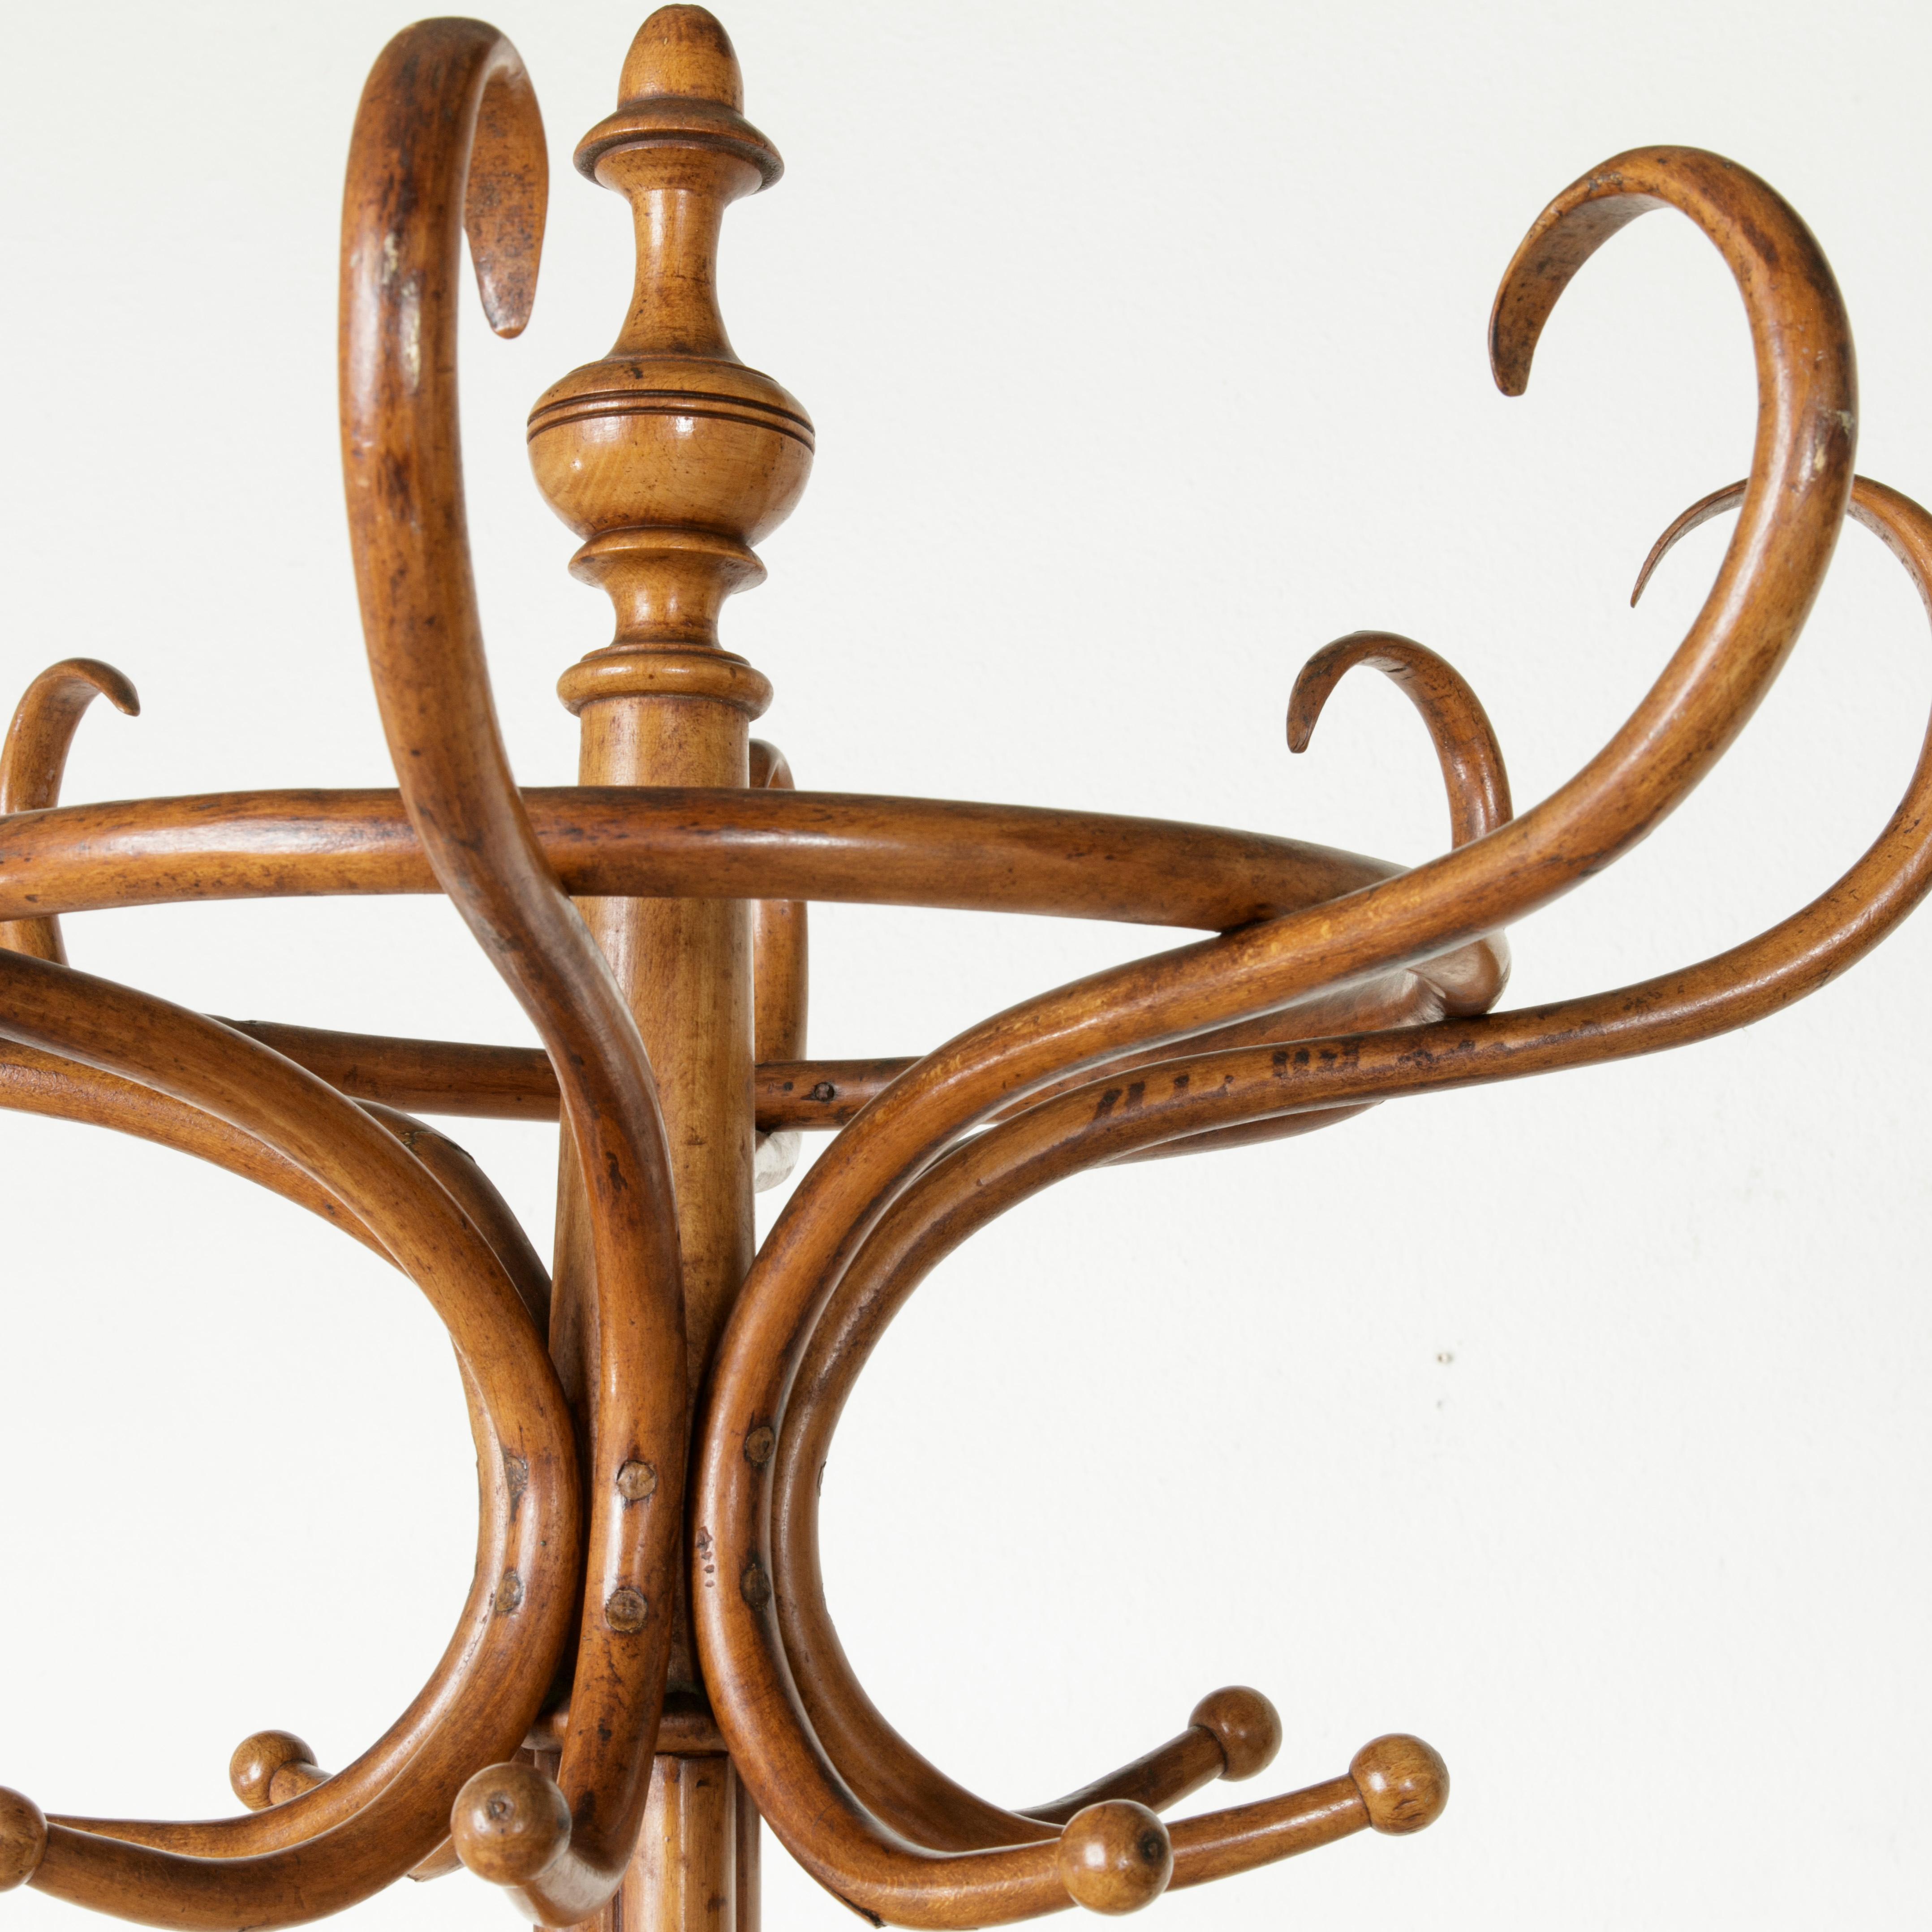 Beech Early 20th Century French Thonet Bentwood Hall Tree Coat and Hat Rack